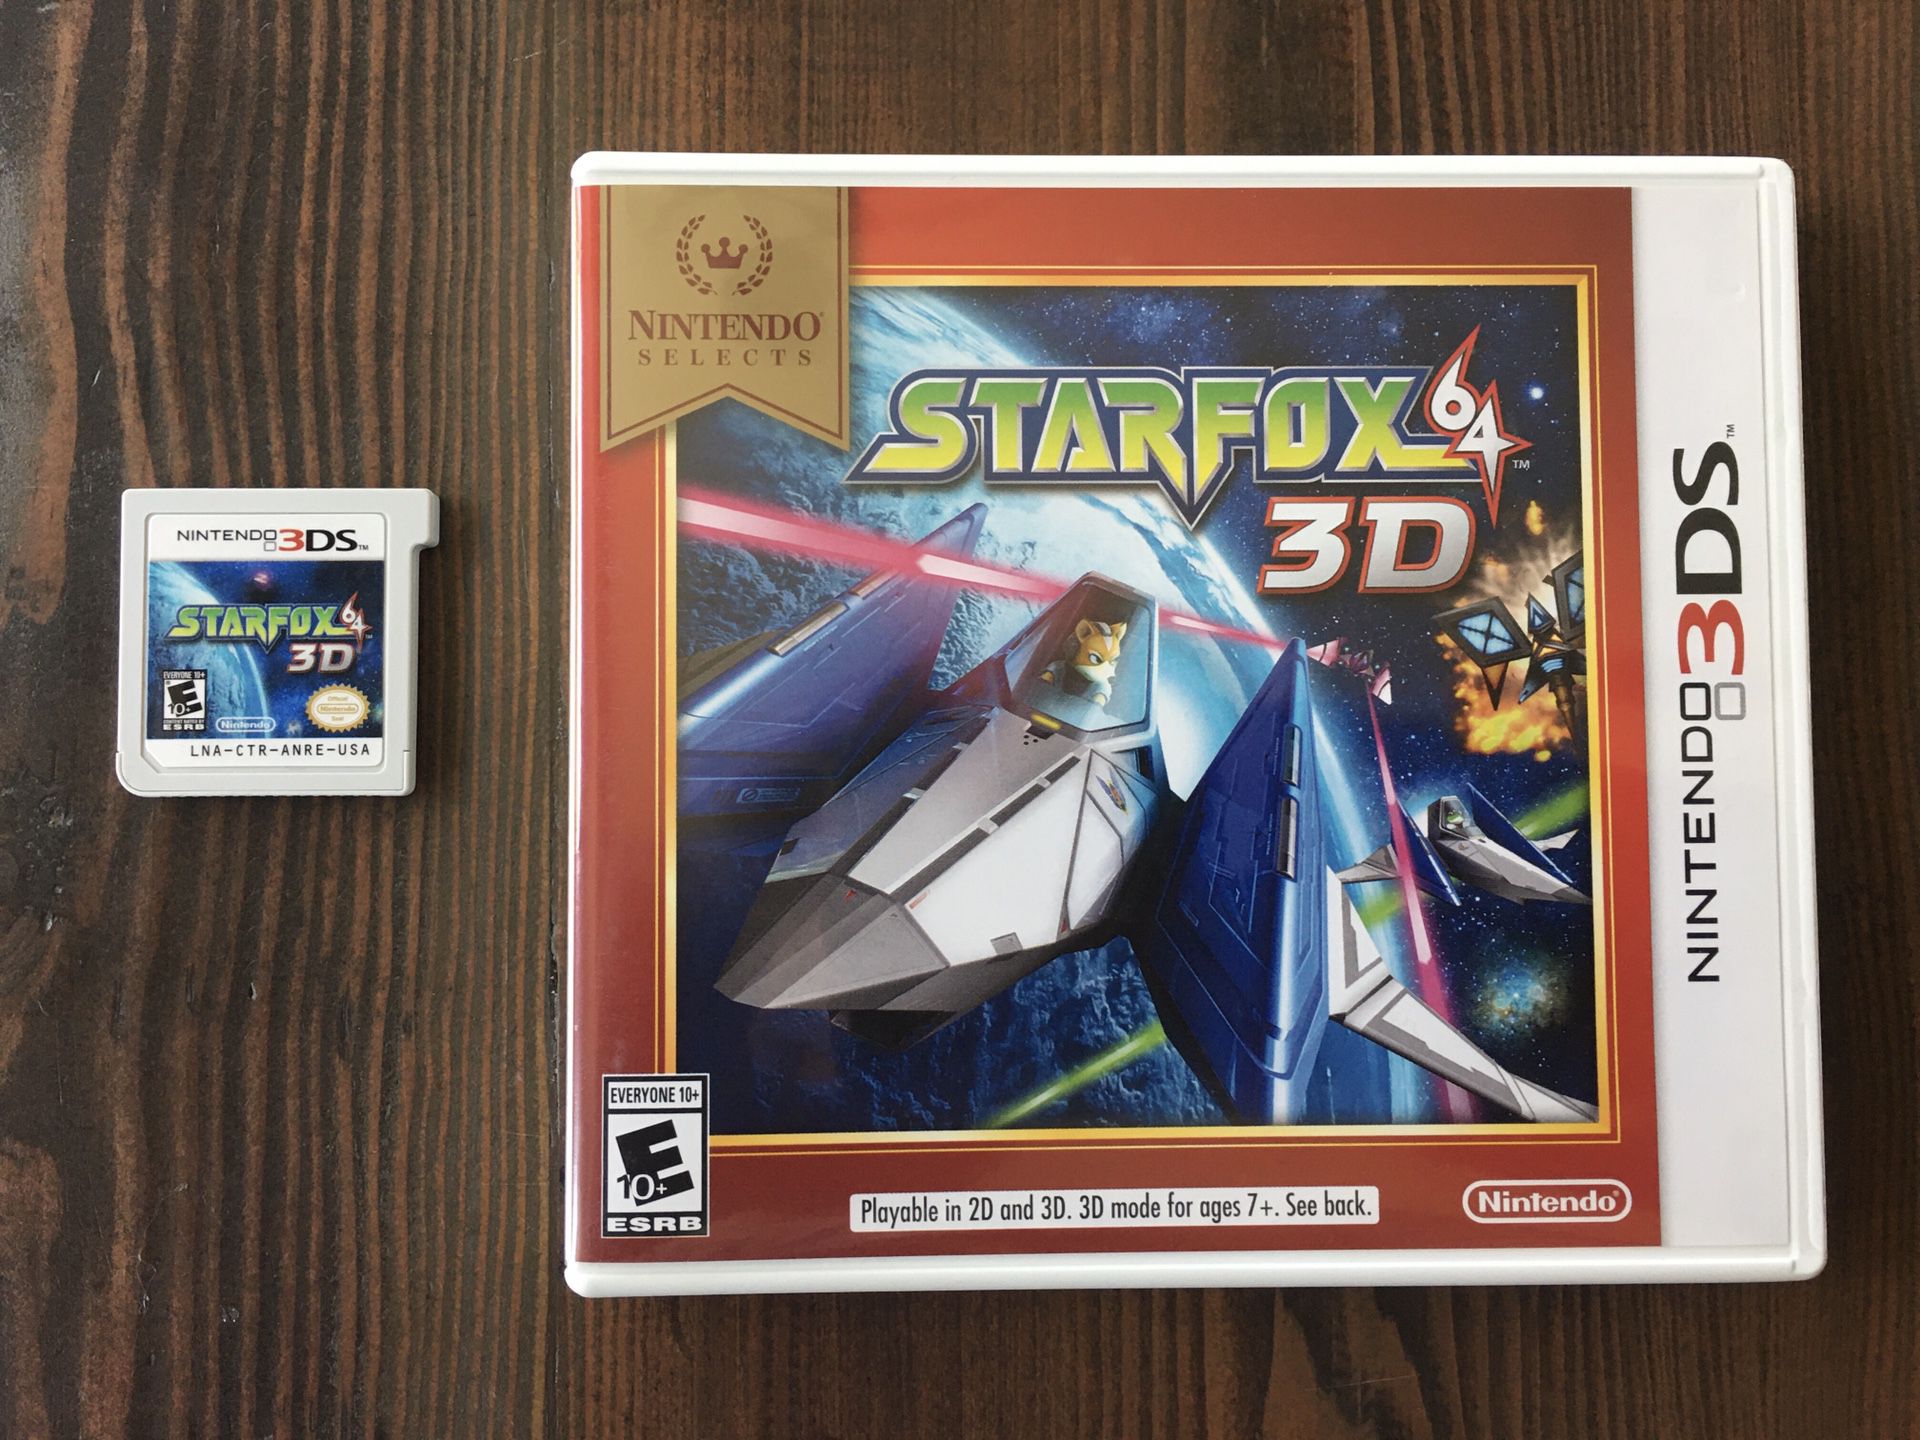 Starfox 64 3D for Nintendo 3DS (and 2DS)